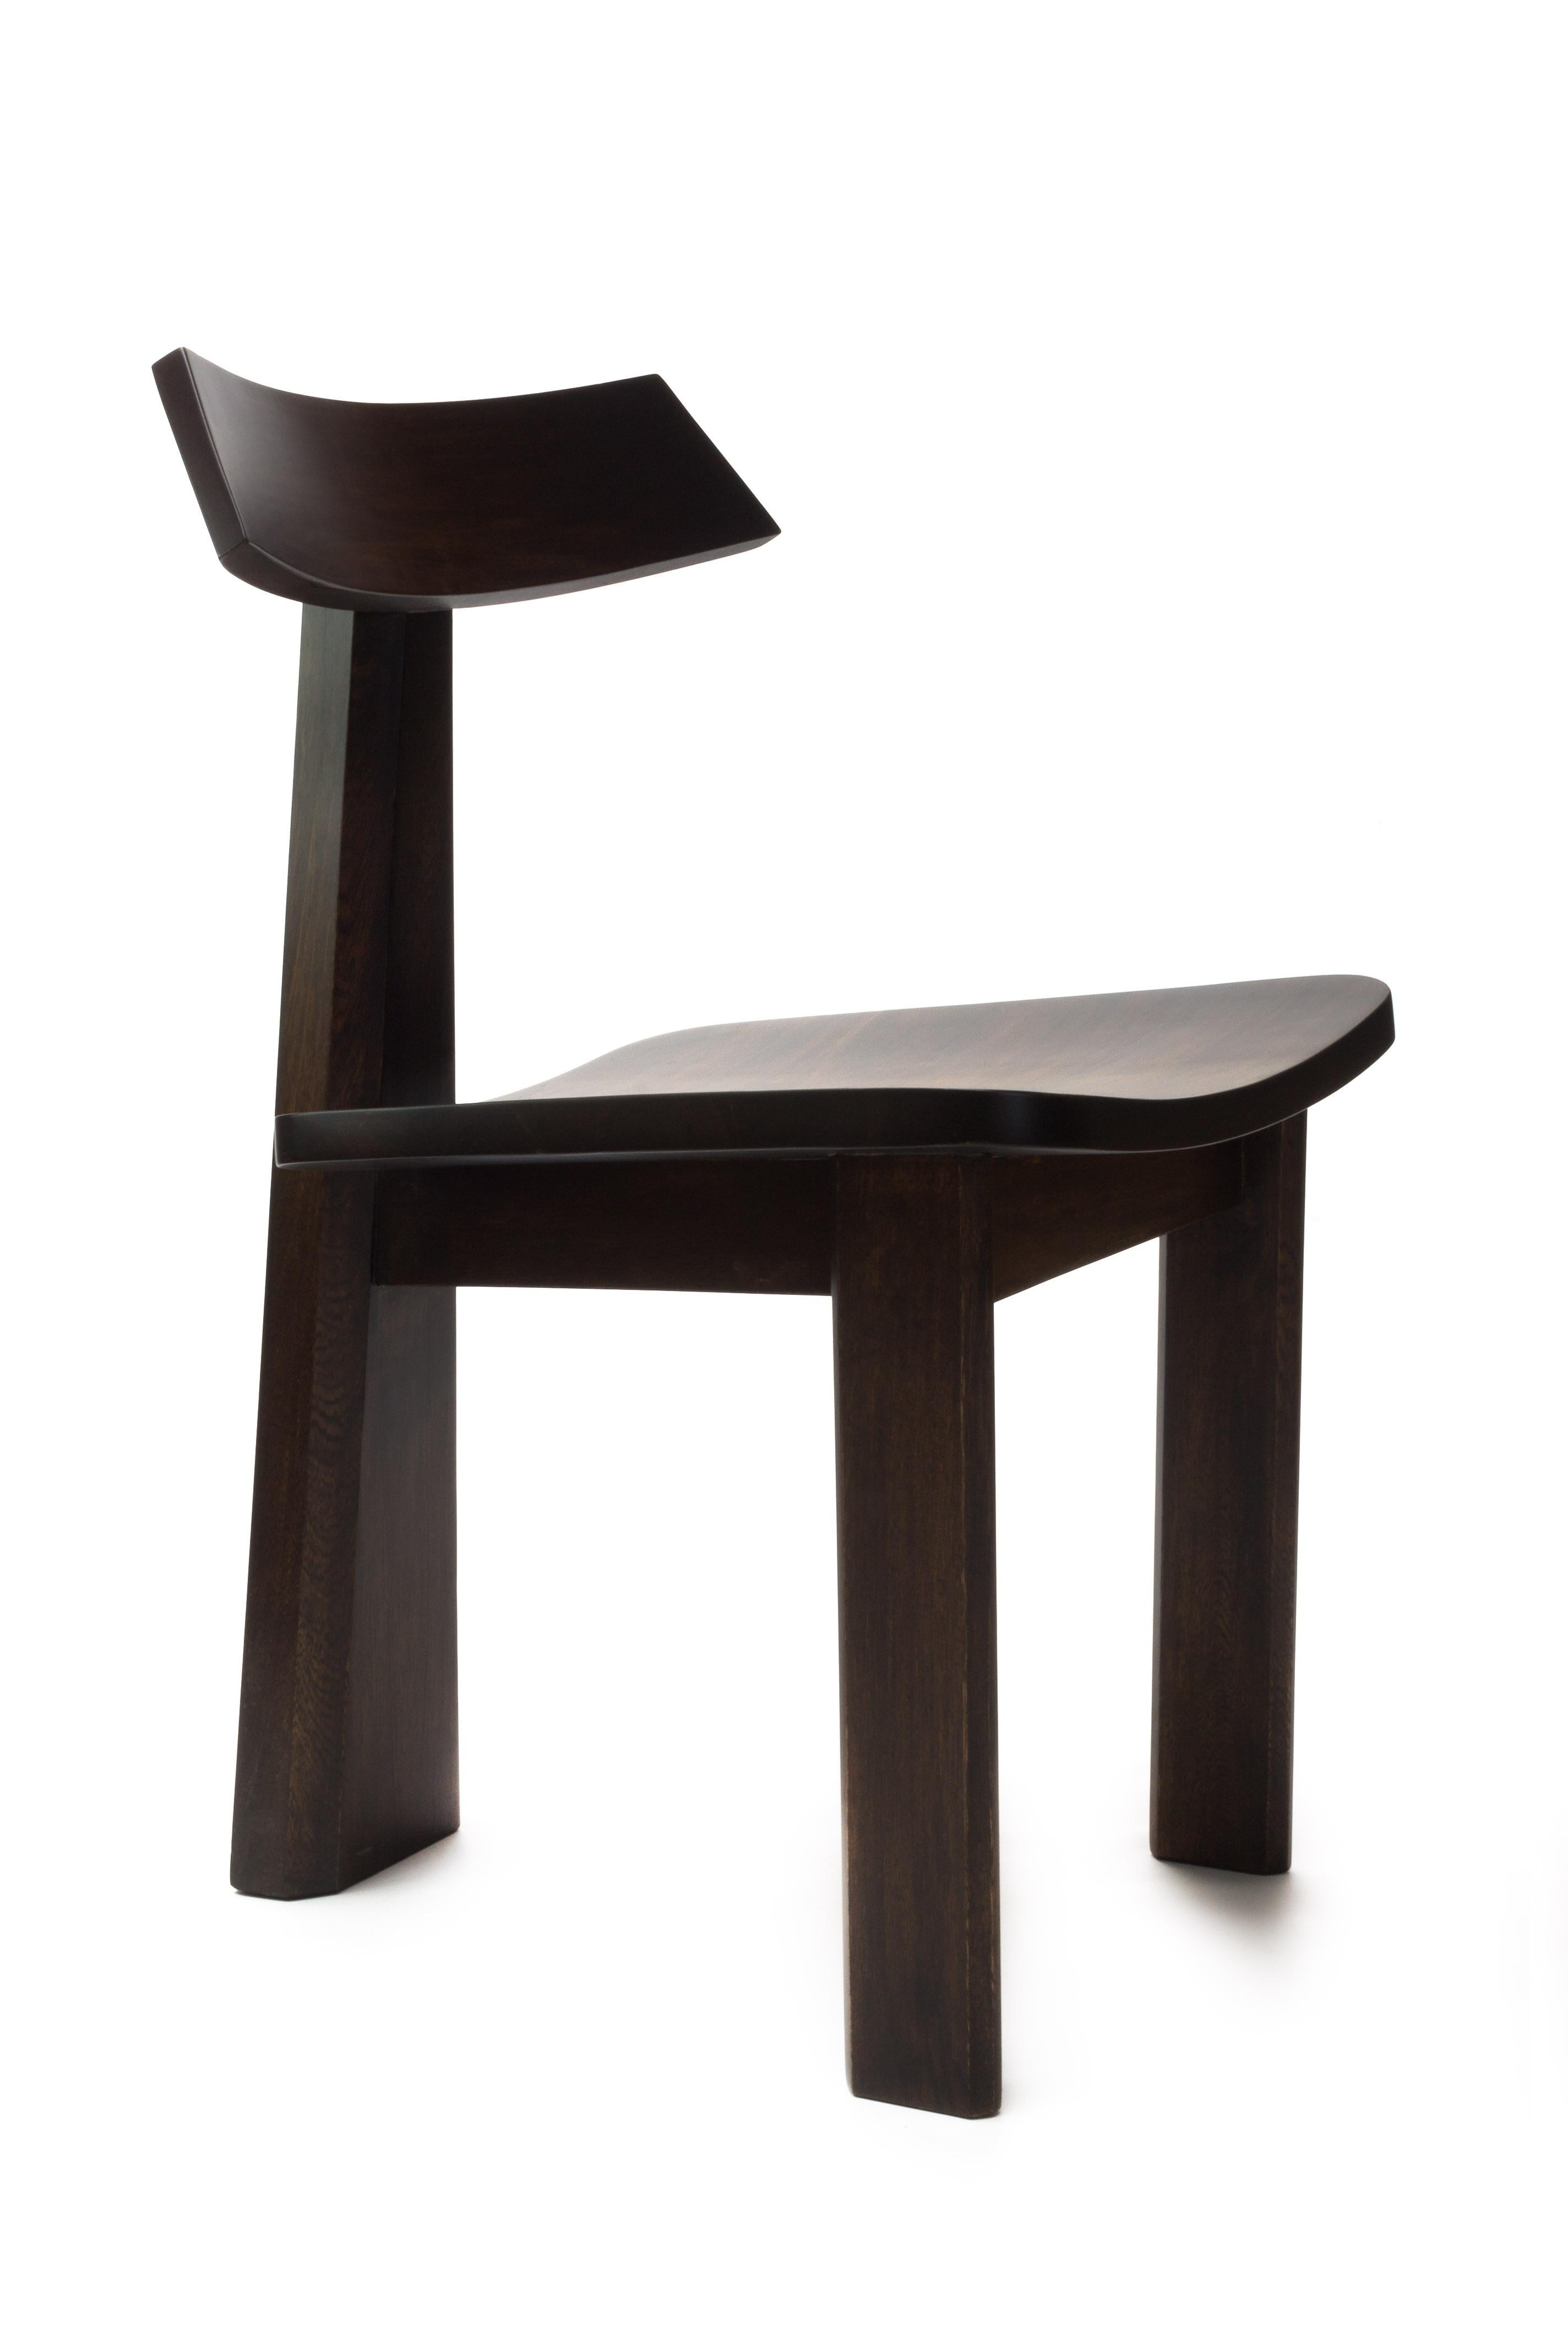 Dining chair DAGON by Camilo Andres Rodriguez Marquez (aka CarmWorks)

Solid oak or cedar / Burnt wood or natural

Each piece is made to order and hand crafted by the artist.

--
Camilo Andres Rodriguez Marquez is a Colombian born designer